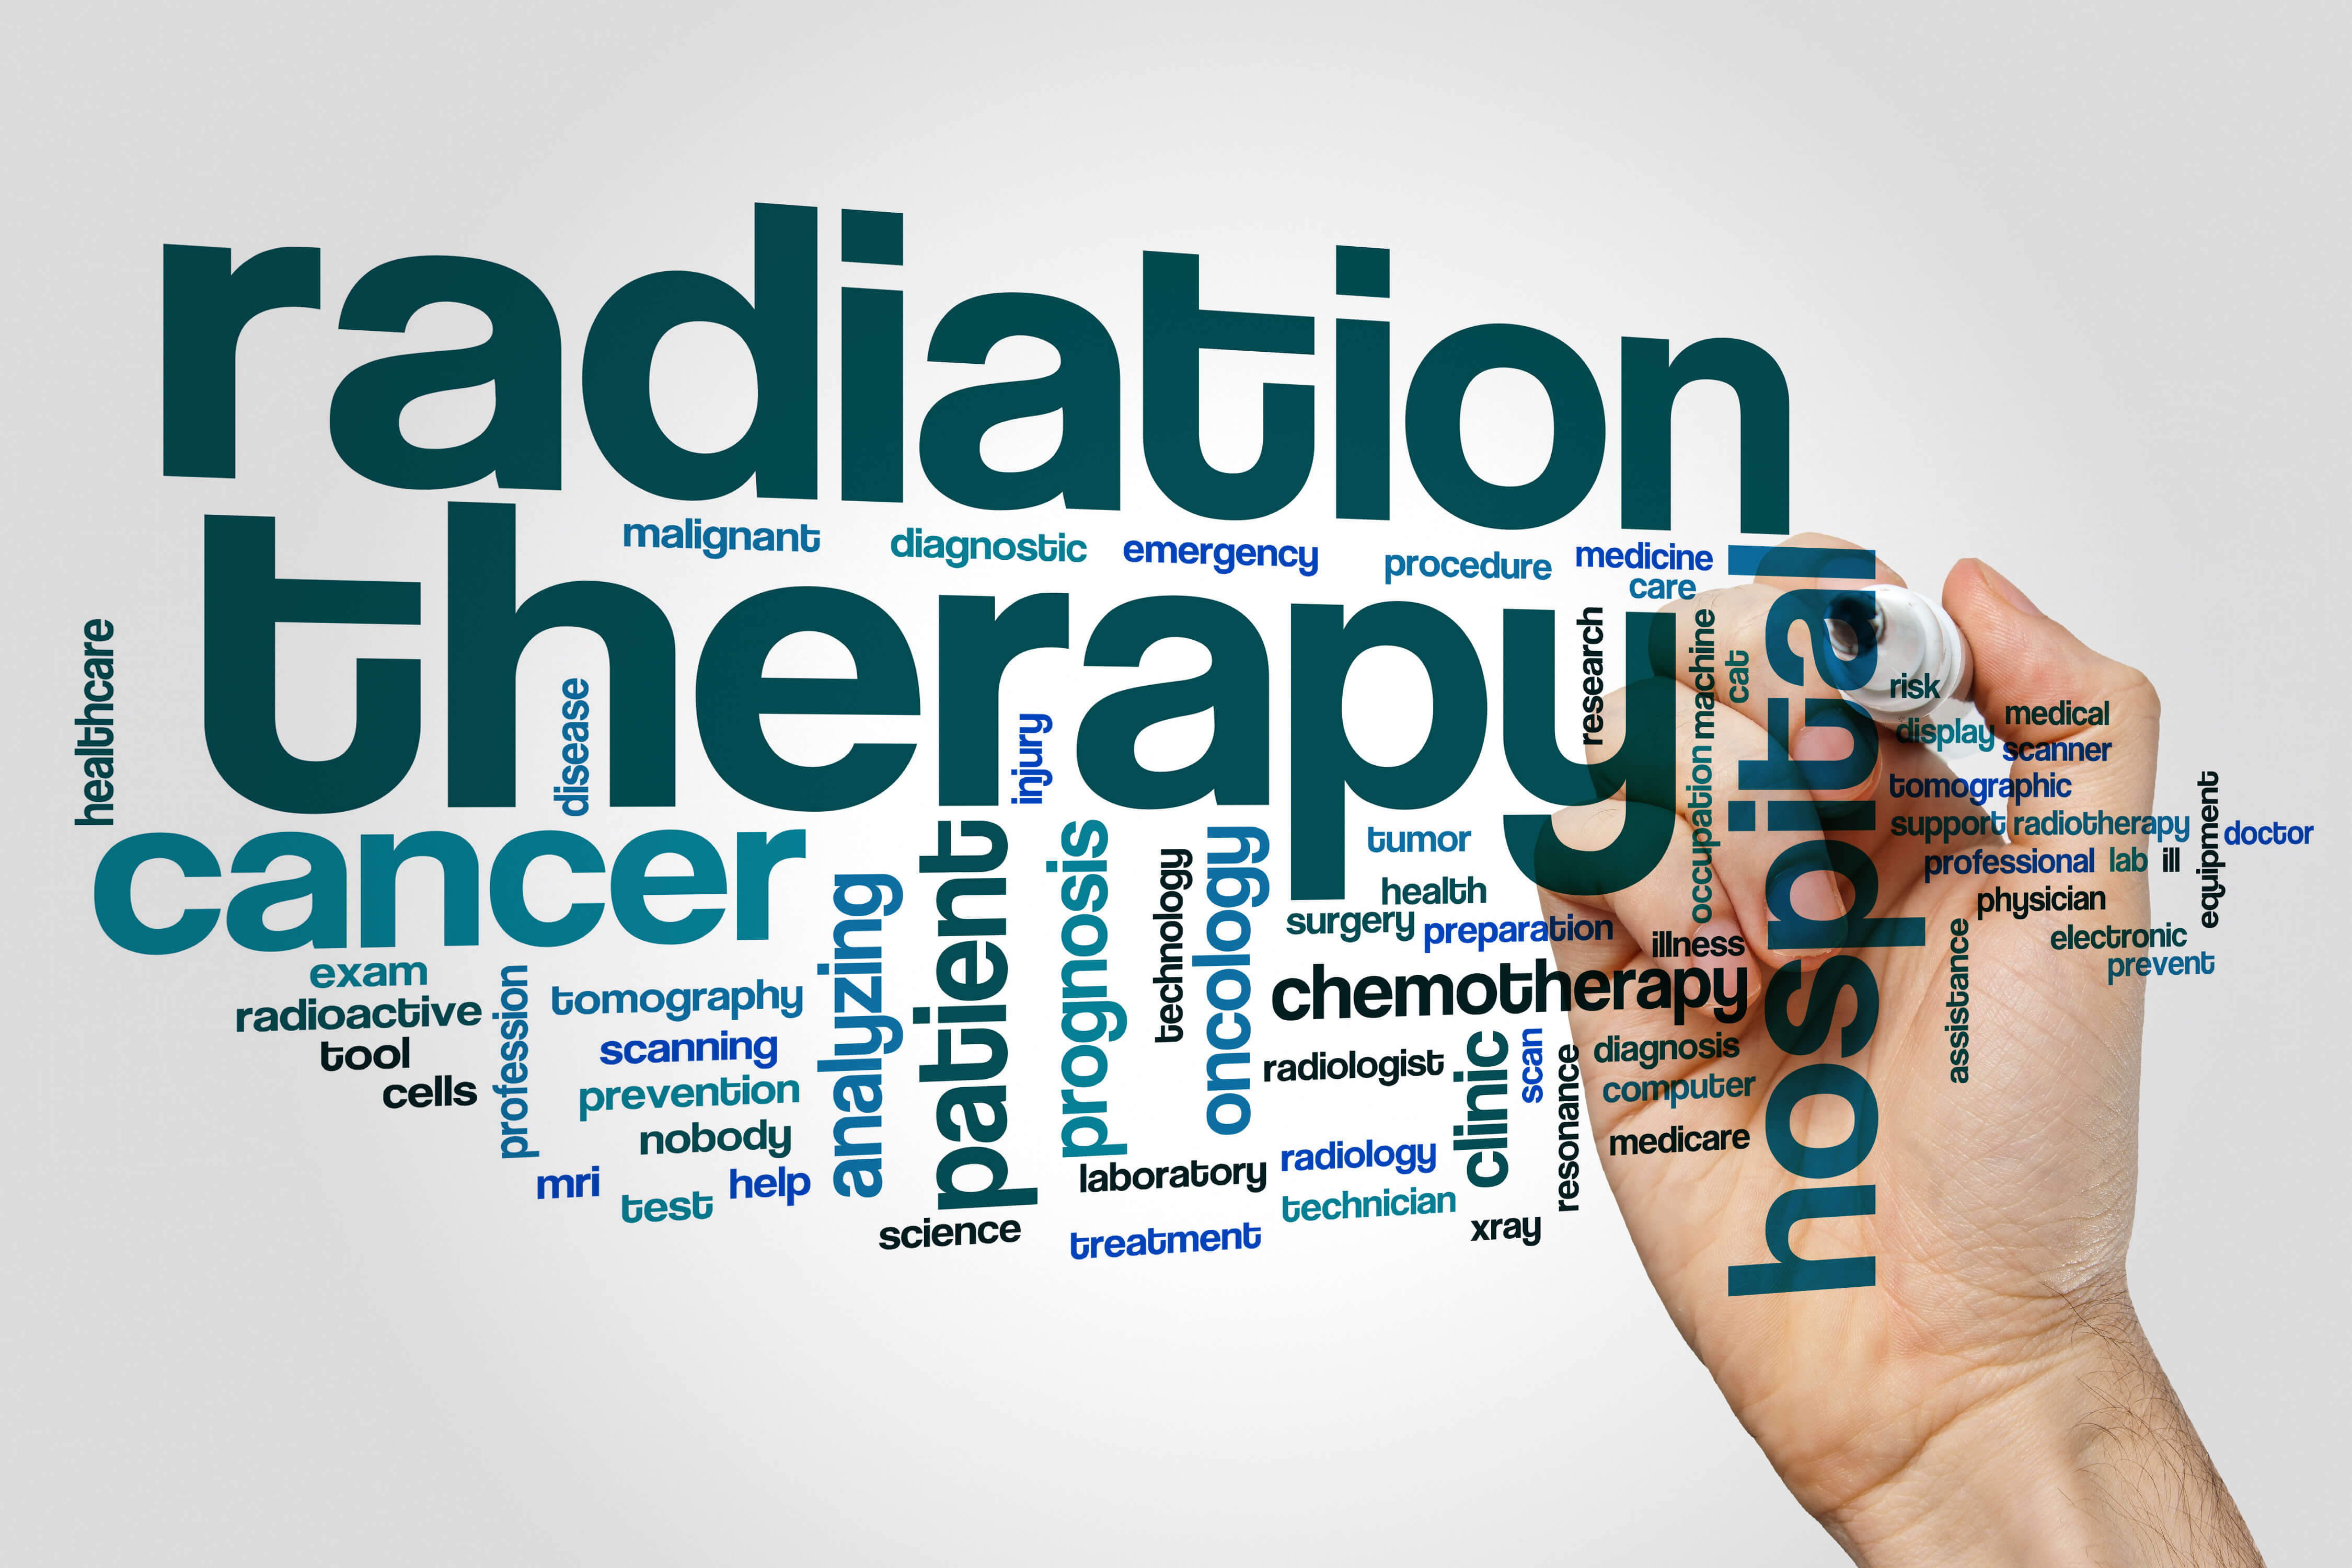 How Do I Match In Radiation Oncology?